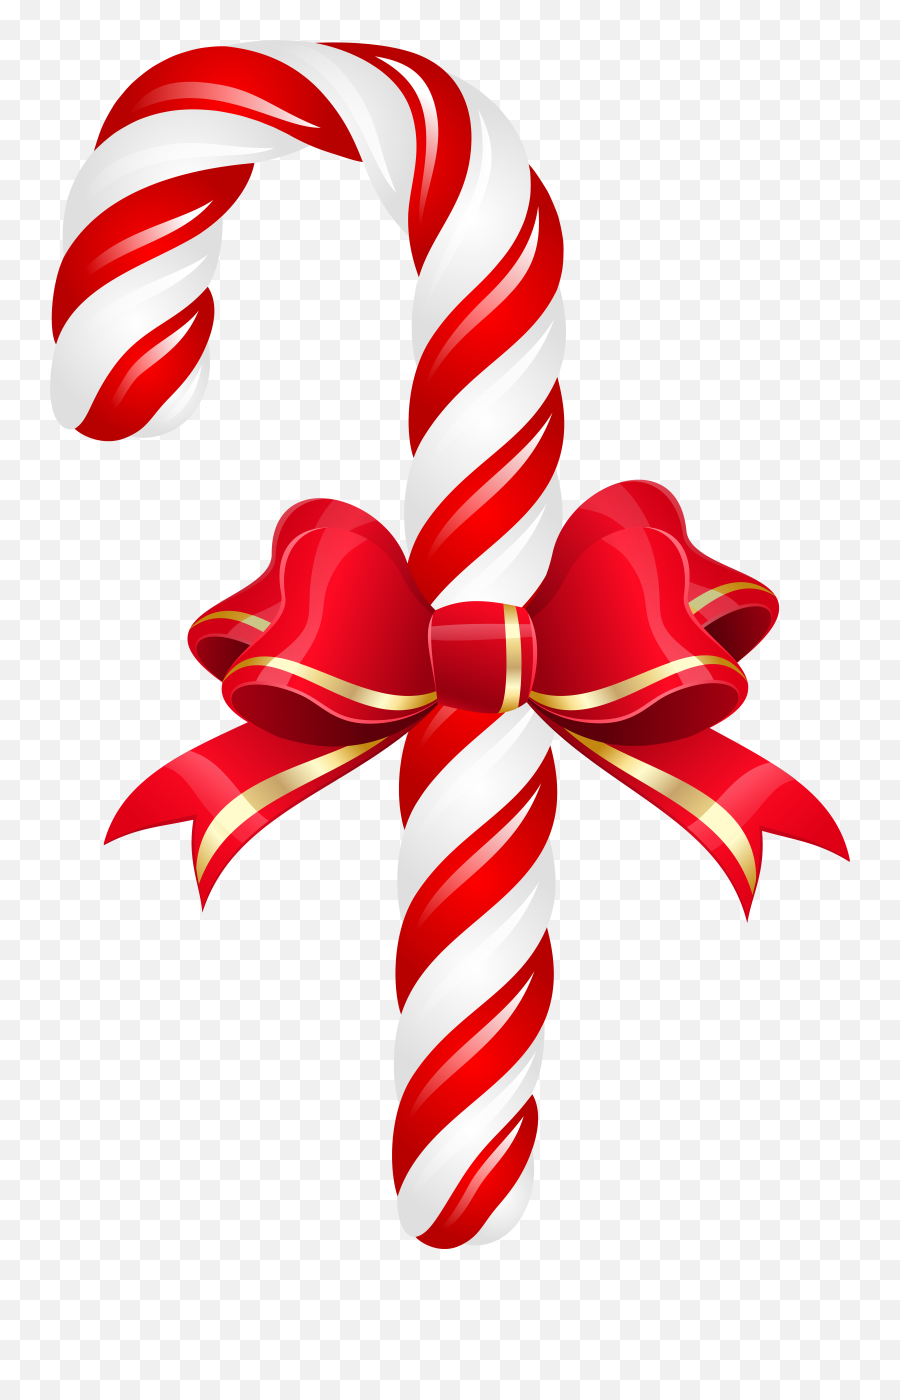 Candy Cane Clipart With Bow - Candy Cane With Ribbon Emoji,Cane Emoji